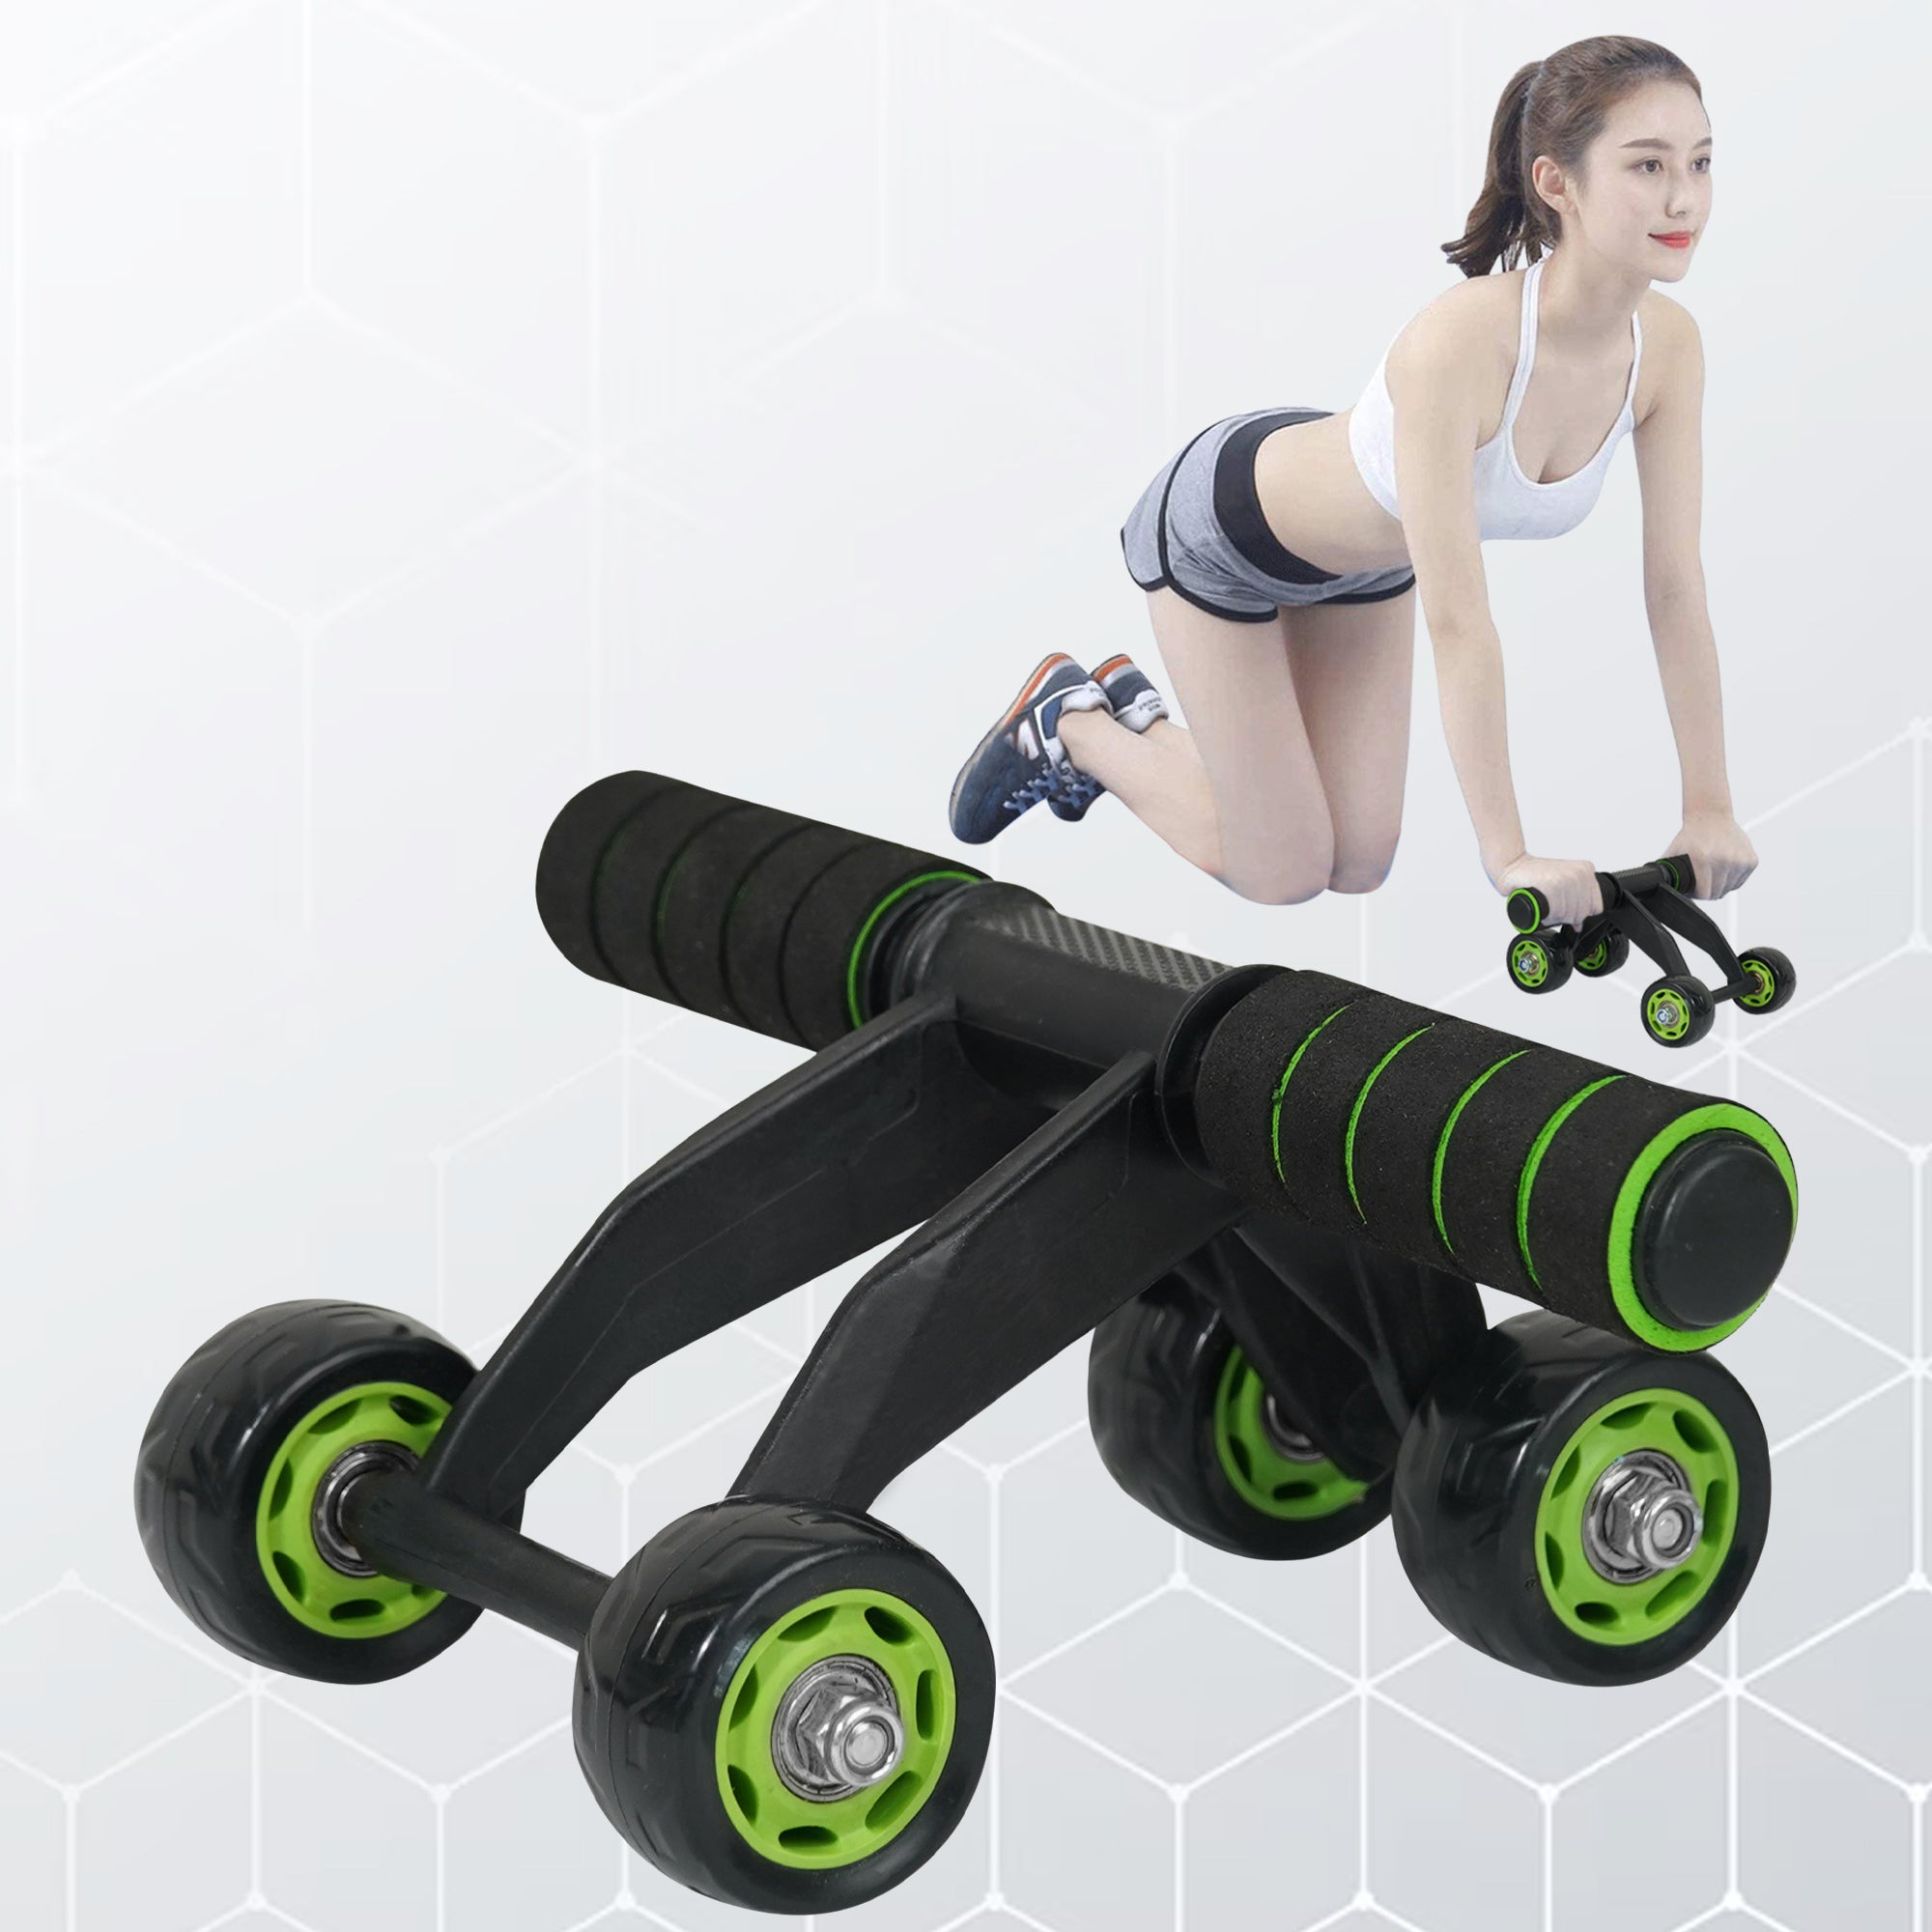 Manogyam 4 Wheel Ab Roller - Fitness Equipment for Core Workout 